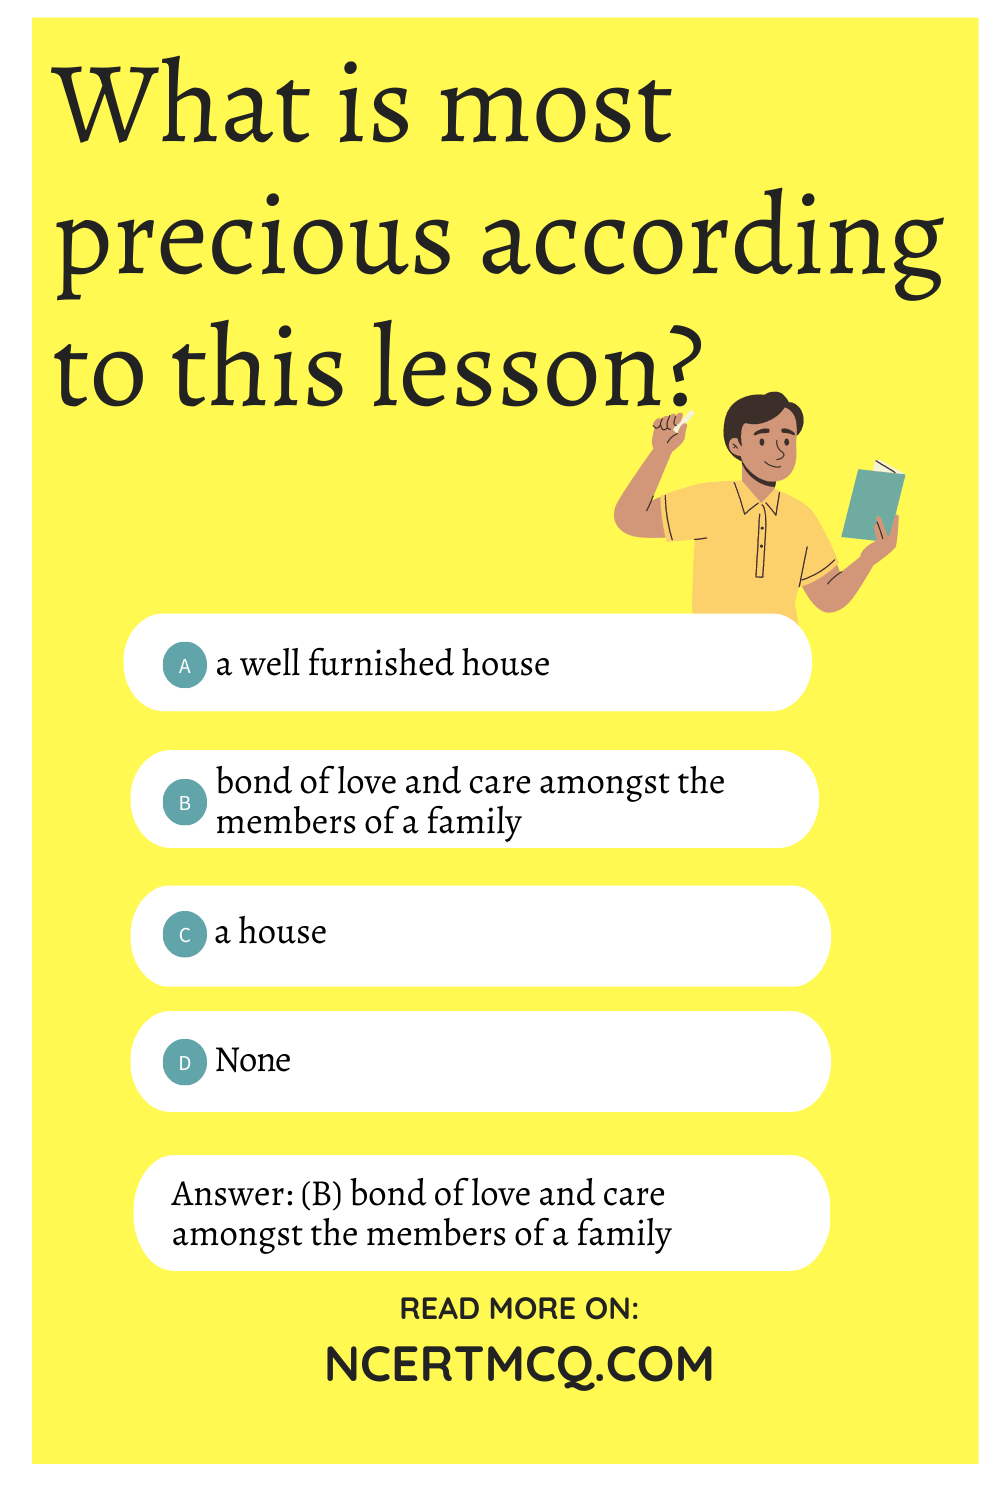 What is most precious according to this lesson?